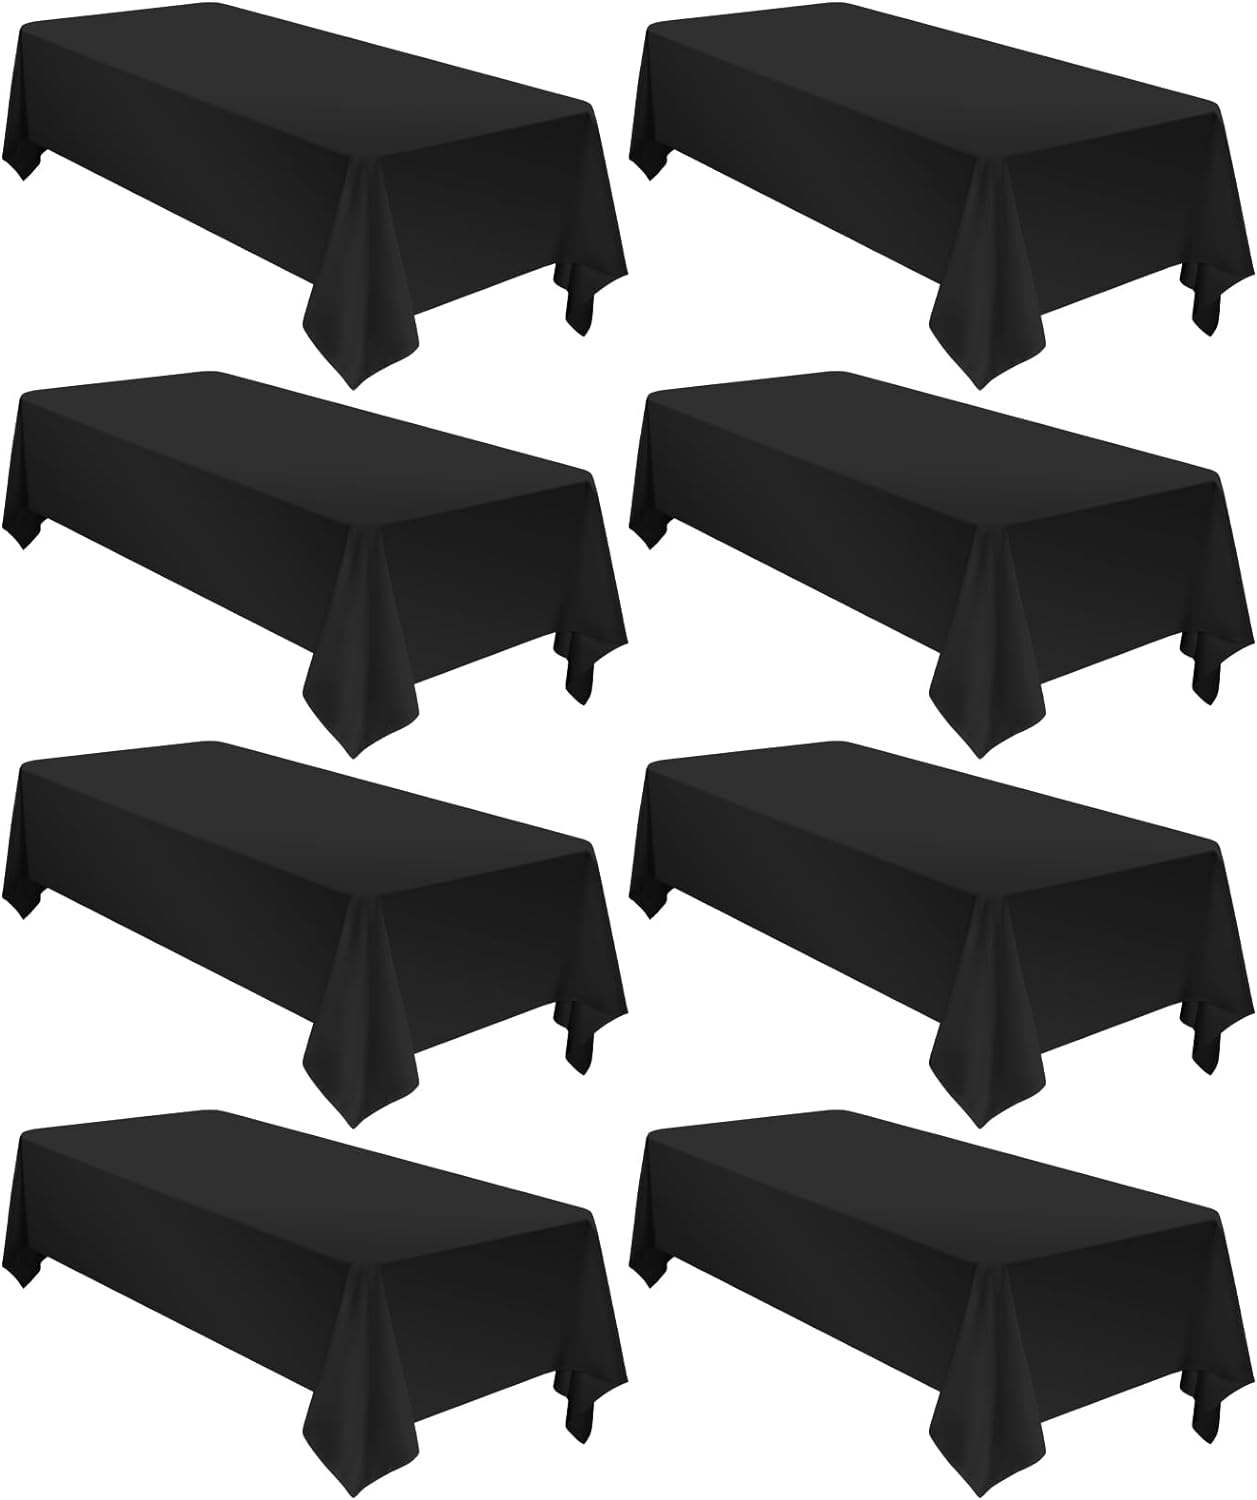 8 Pack Black Tablecloths for Rectangle Tables Stain and Wrinkle Resistant Washable Polyester Tablecloth 60 x 126 Inch Table Cloth Rectangle Table 6 Foot Rectangle Table Cloth for Wedding Party